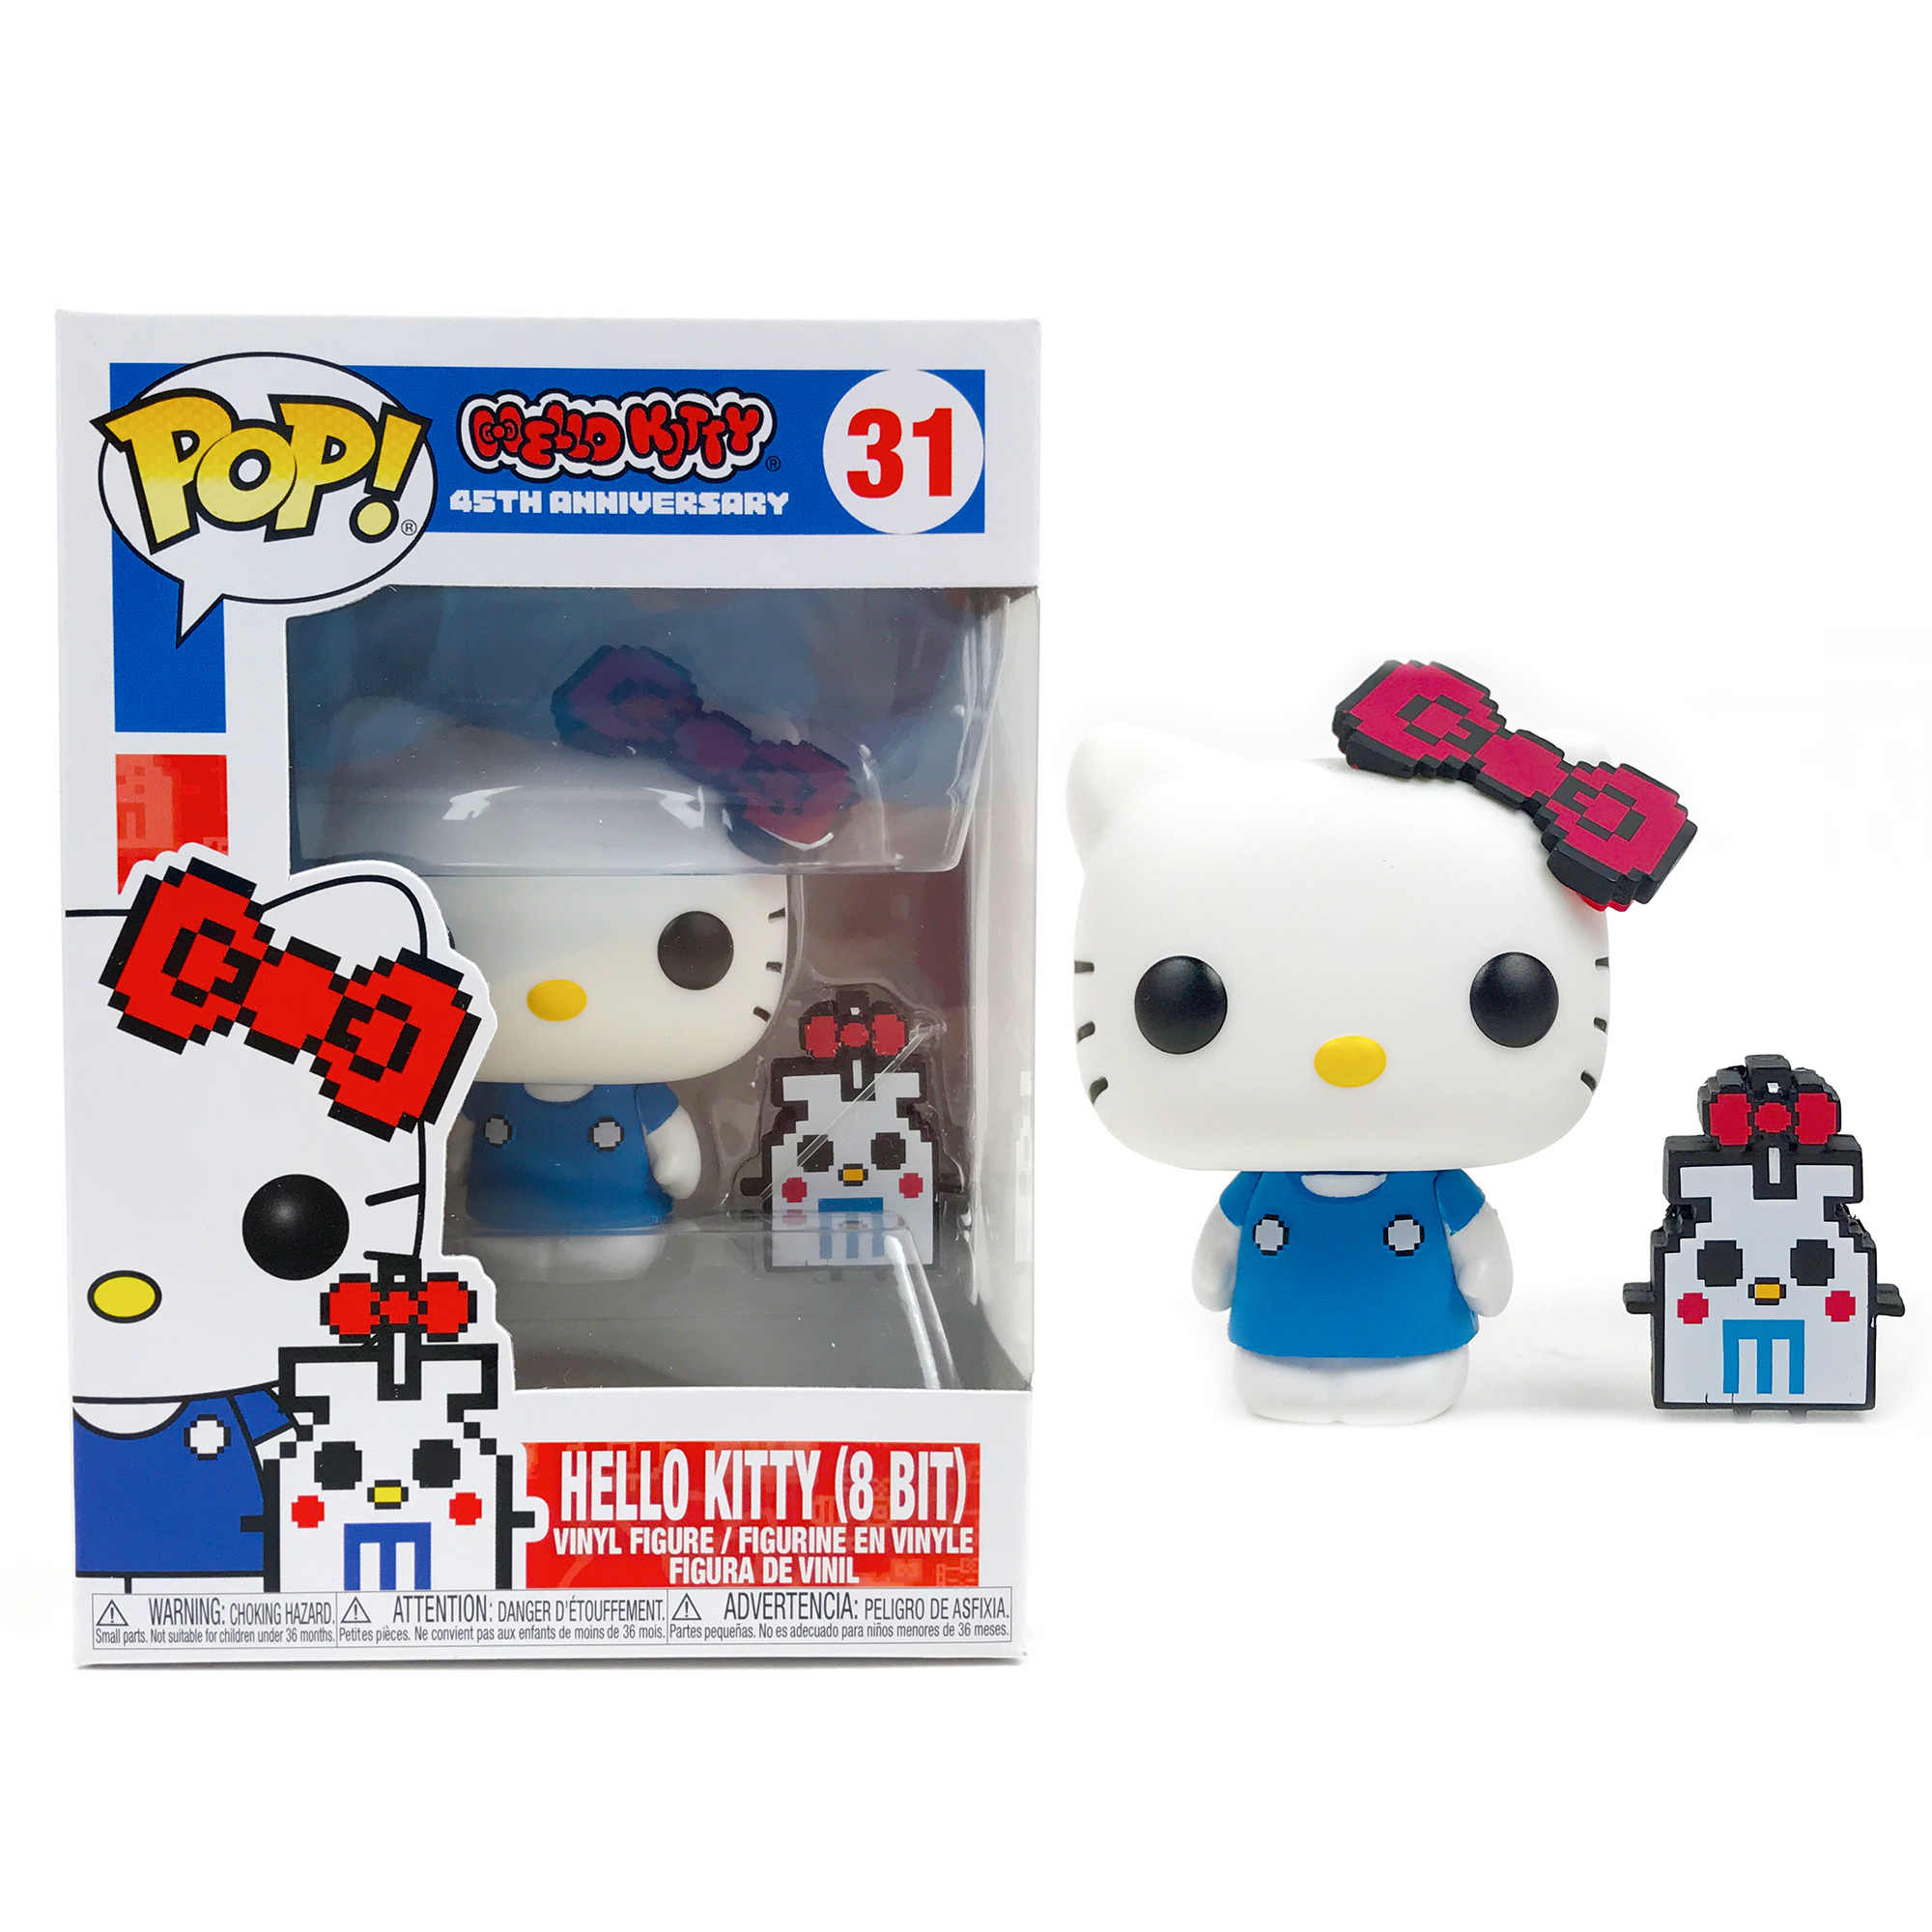 Funko Pop 31 Hello Kitty with buddy 8 bit 45 Anniversary ships in pop protector 